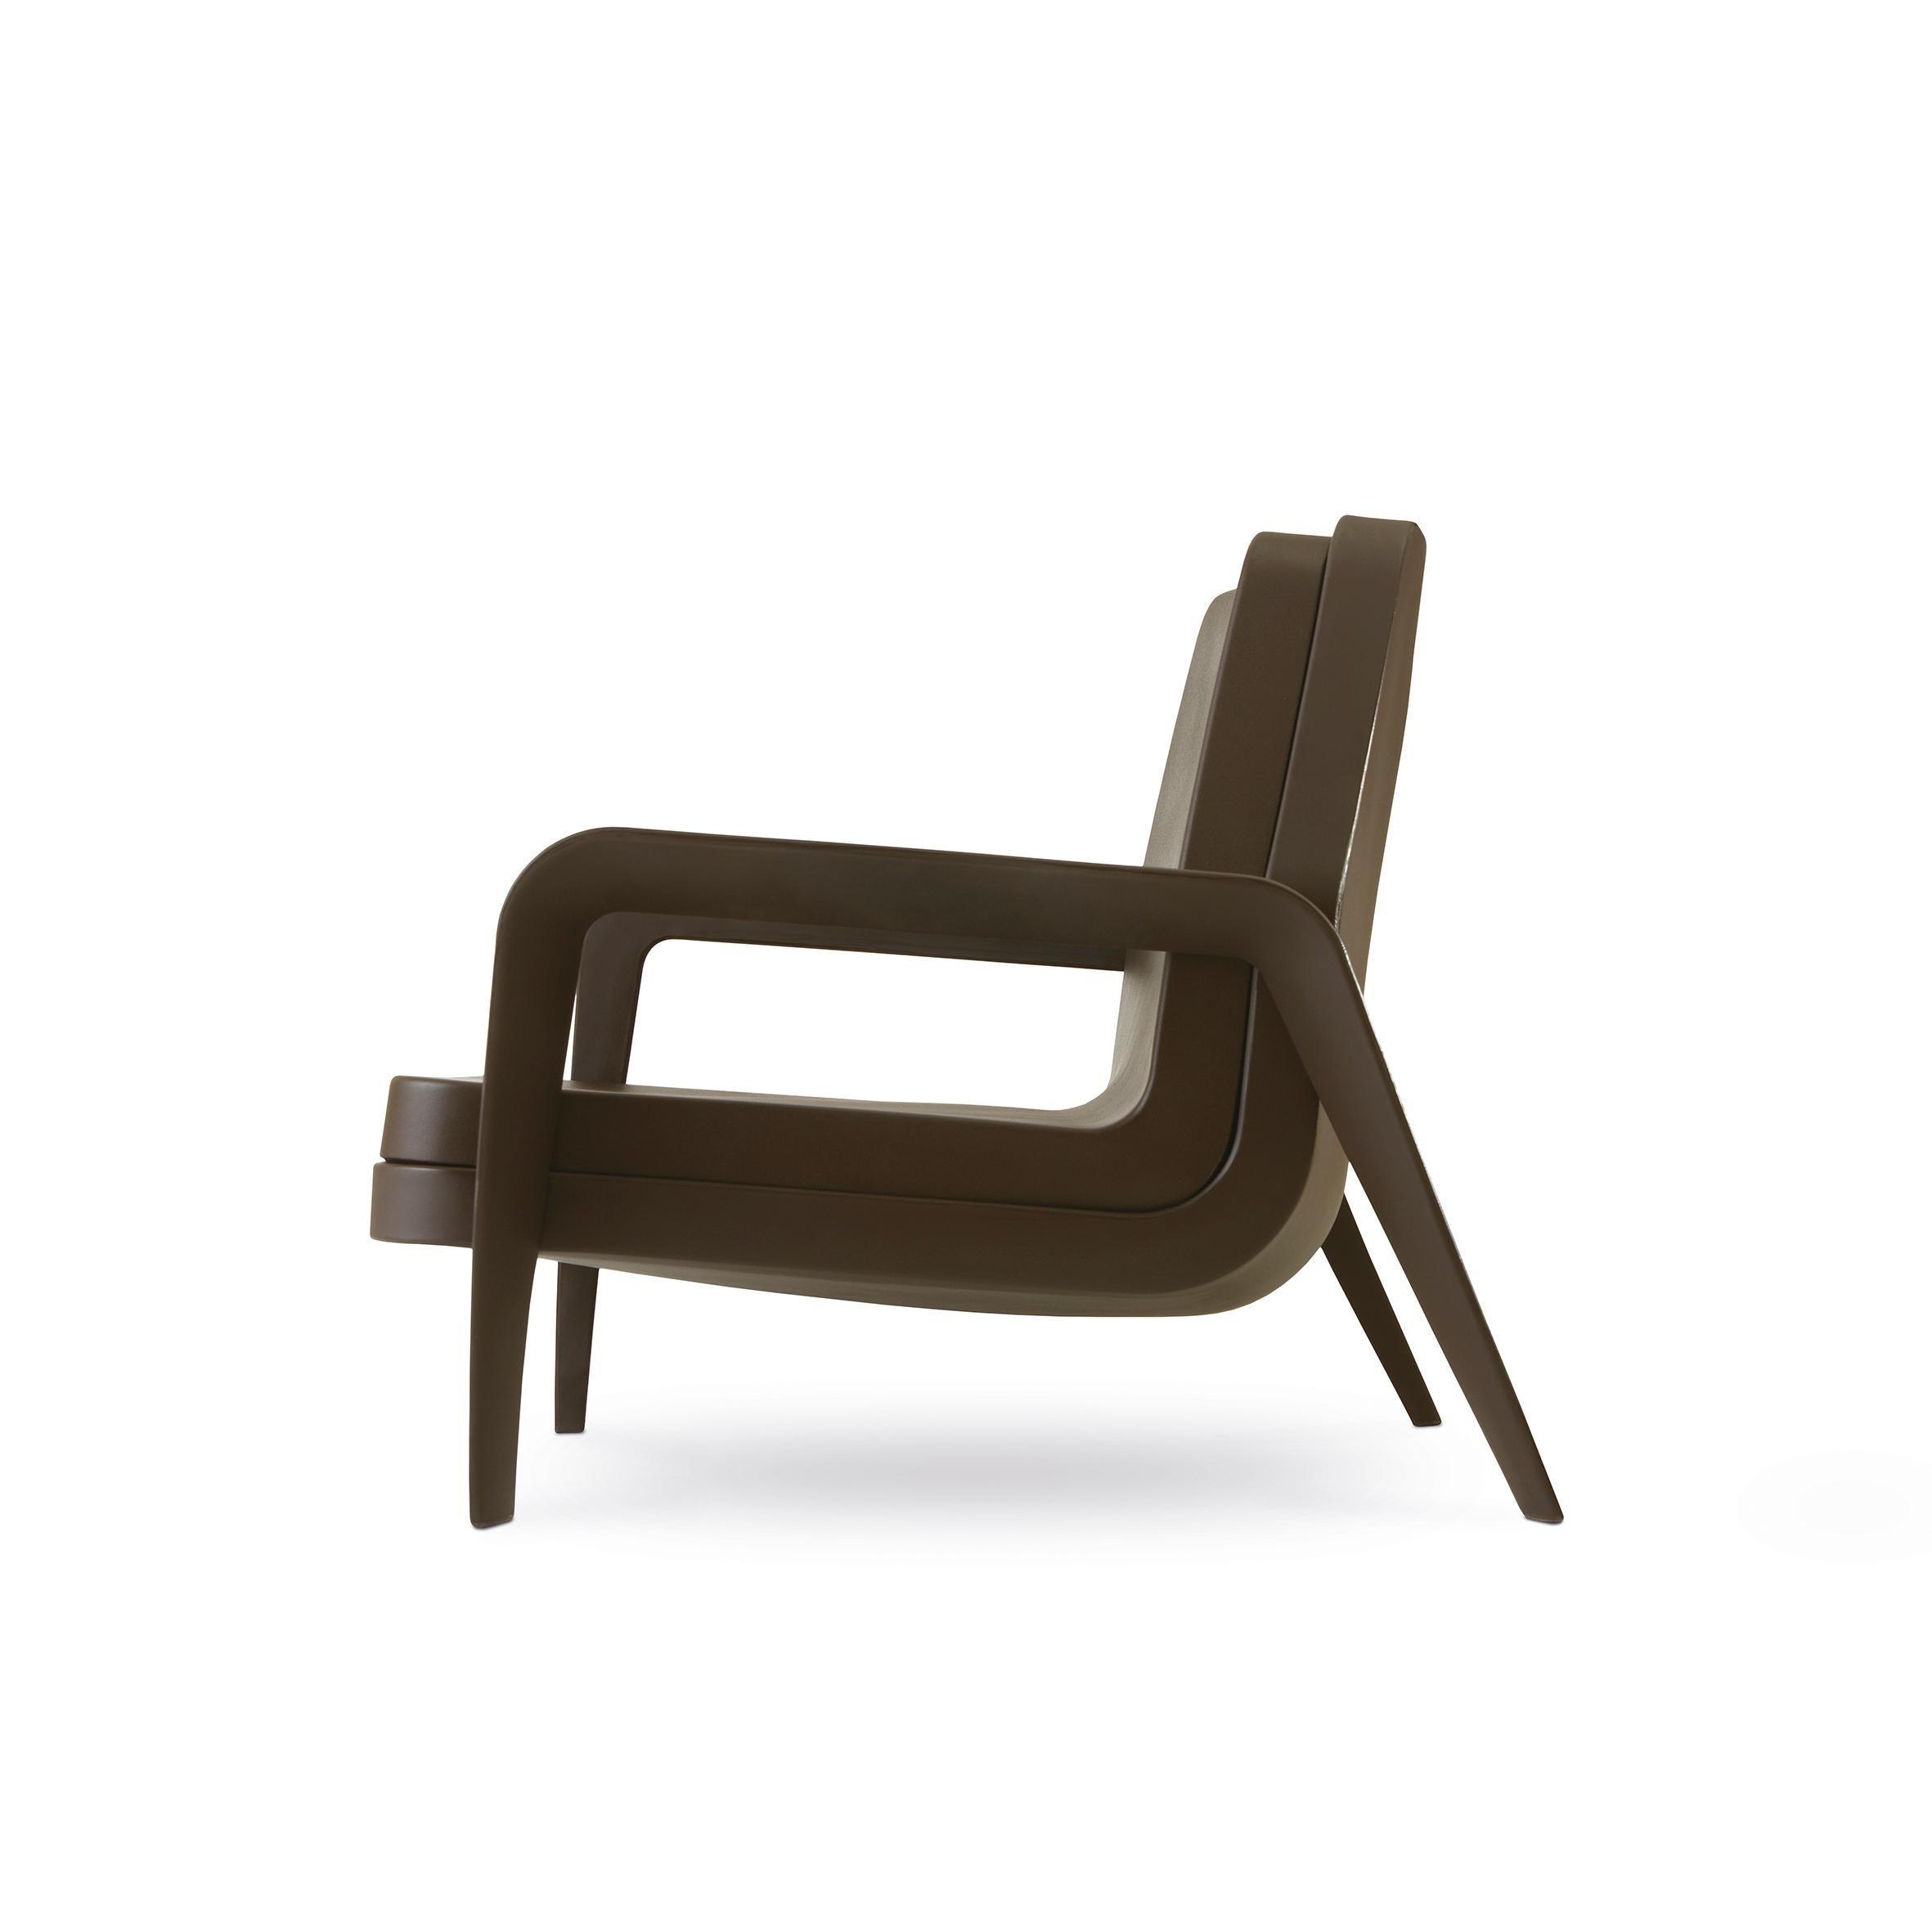 The designer Marc Sadler creates a retro armchair, inspired by the American Swinging ‘50s, with their unique and progressive style. America is an elegant seat, a perfect mix between contemporary materials and vintage inspiration. America has got